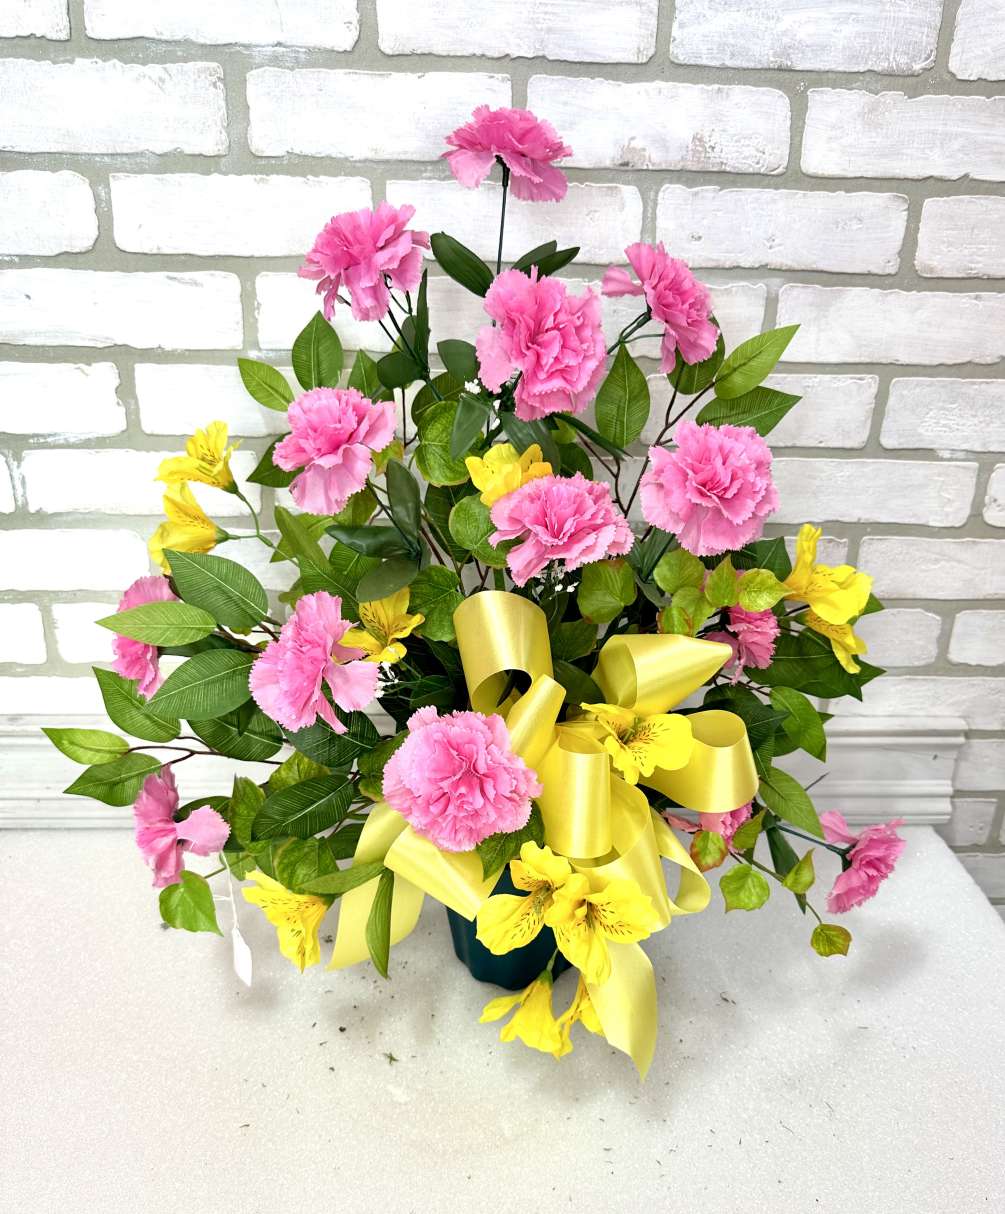 A traditional fan arrangement with silk pink carnations and yellow alstroermeria lilies.